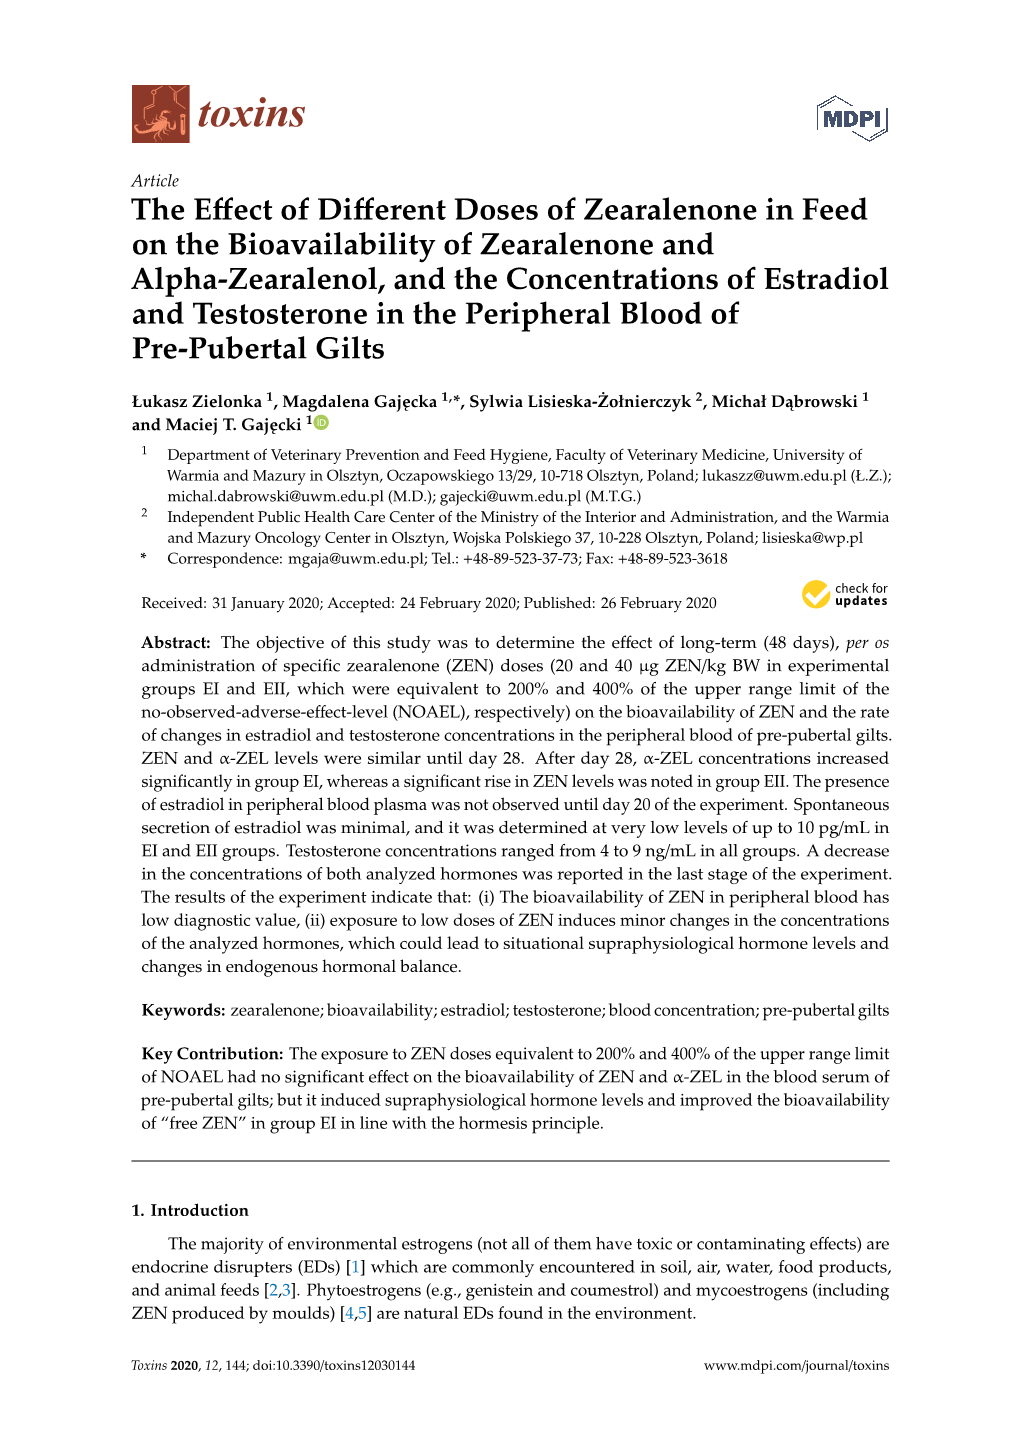 The Effect of Different Doses of Zearalenone in Feed on The